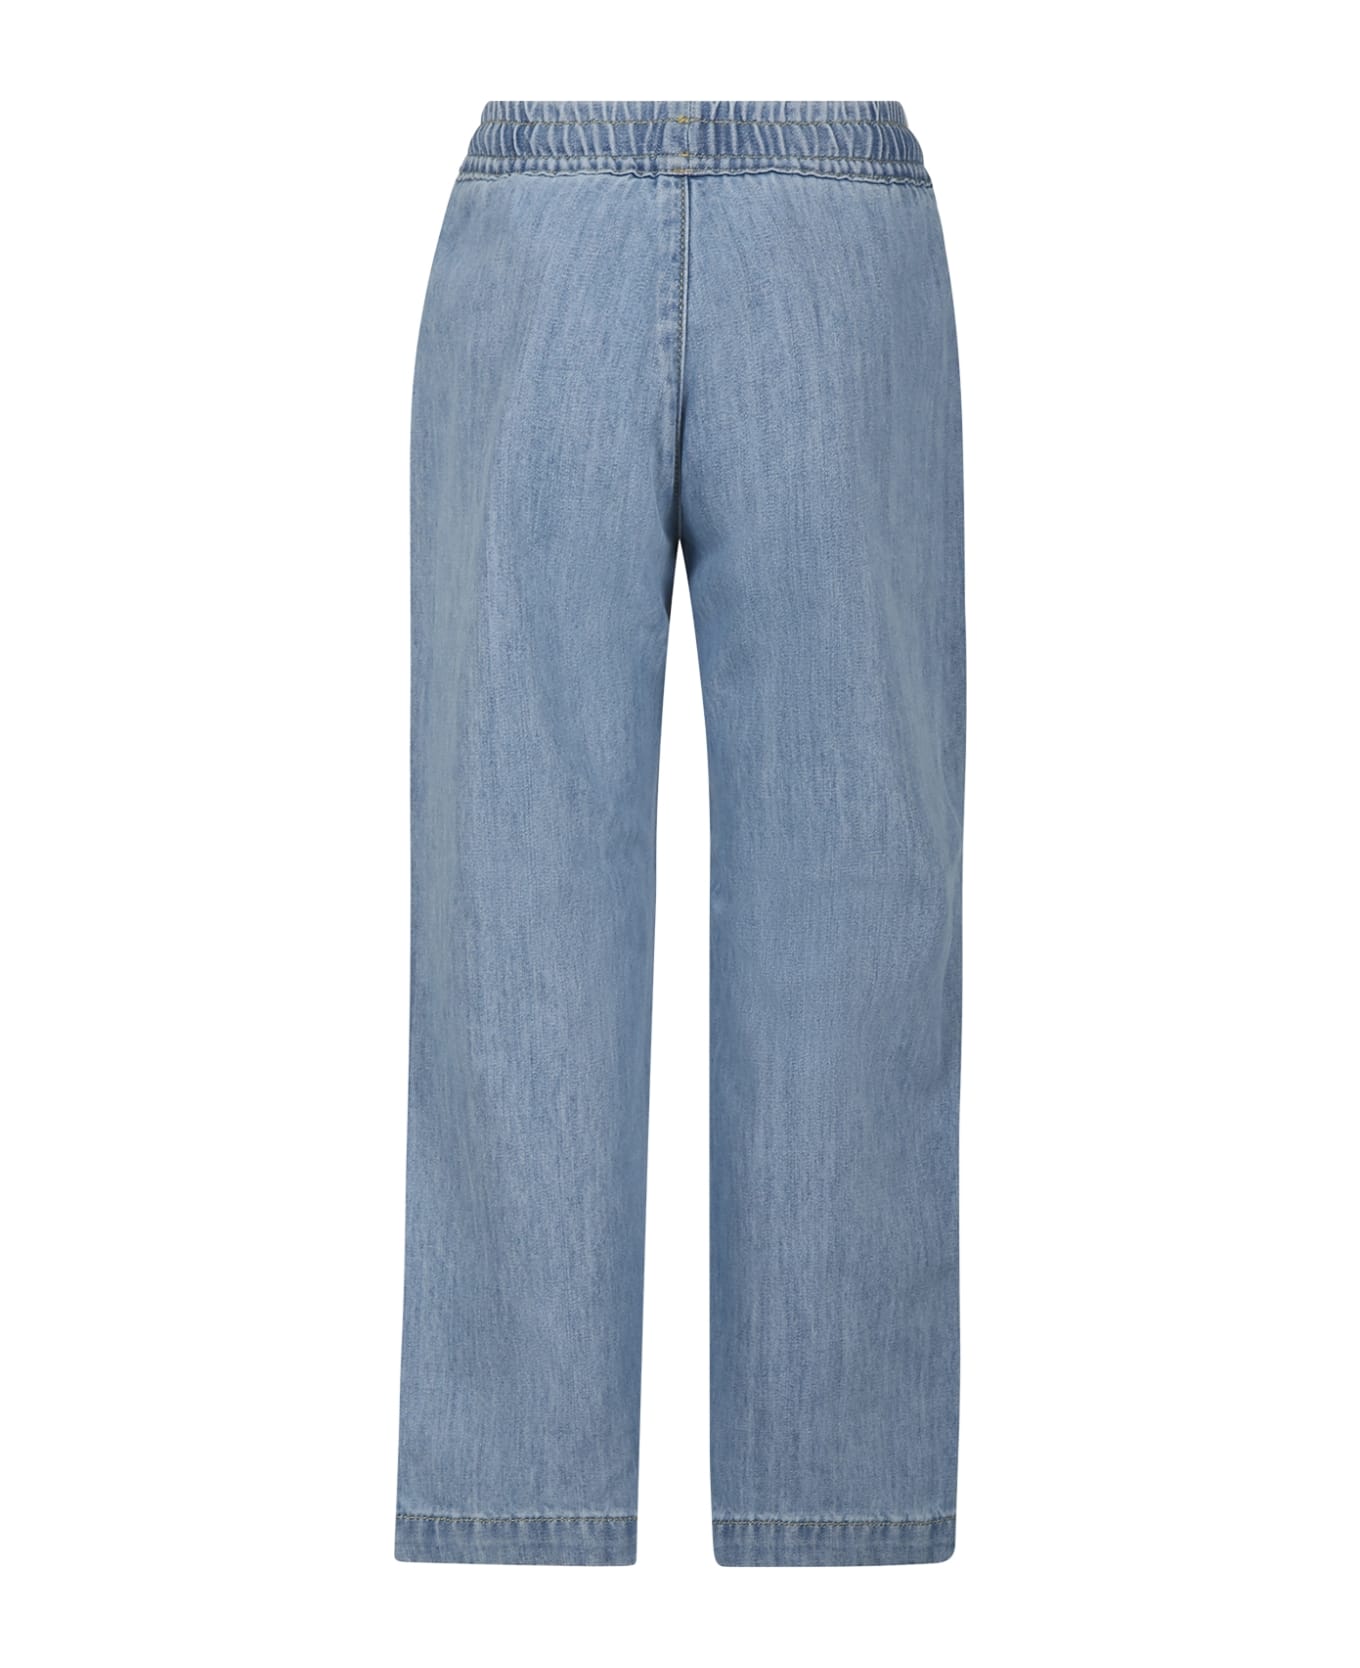 Palm Angels Jeans For Boy With Bands And Logo - Blu Denim